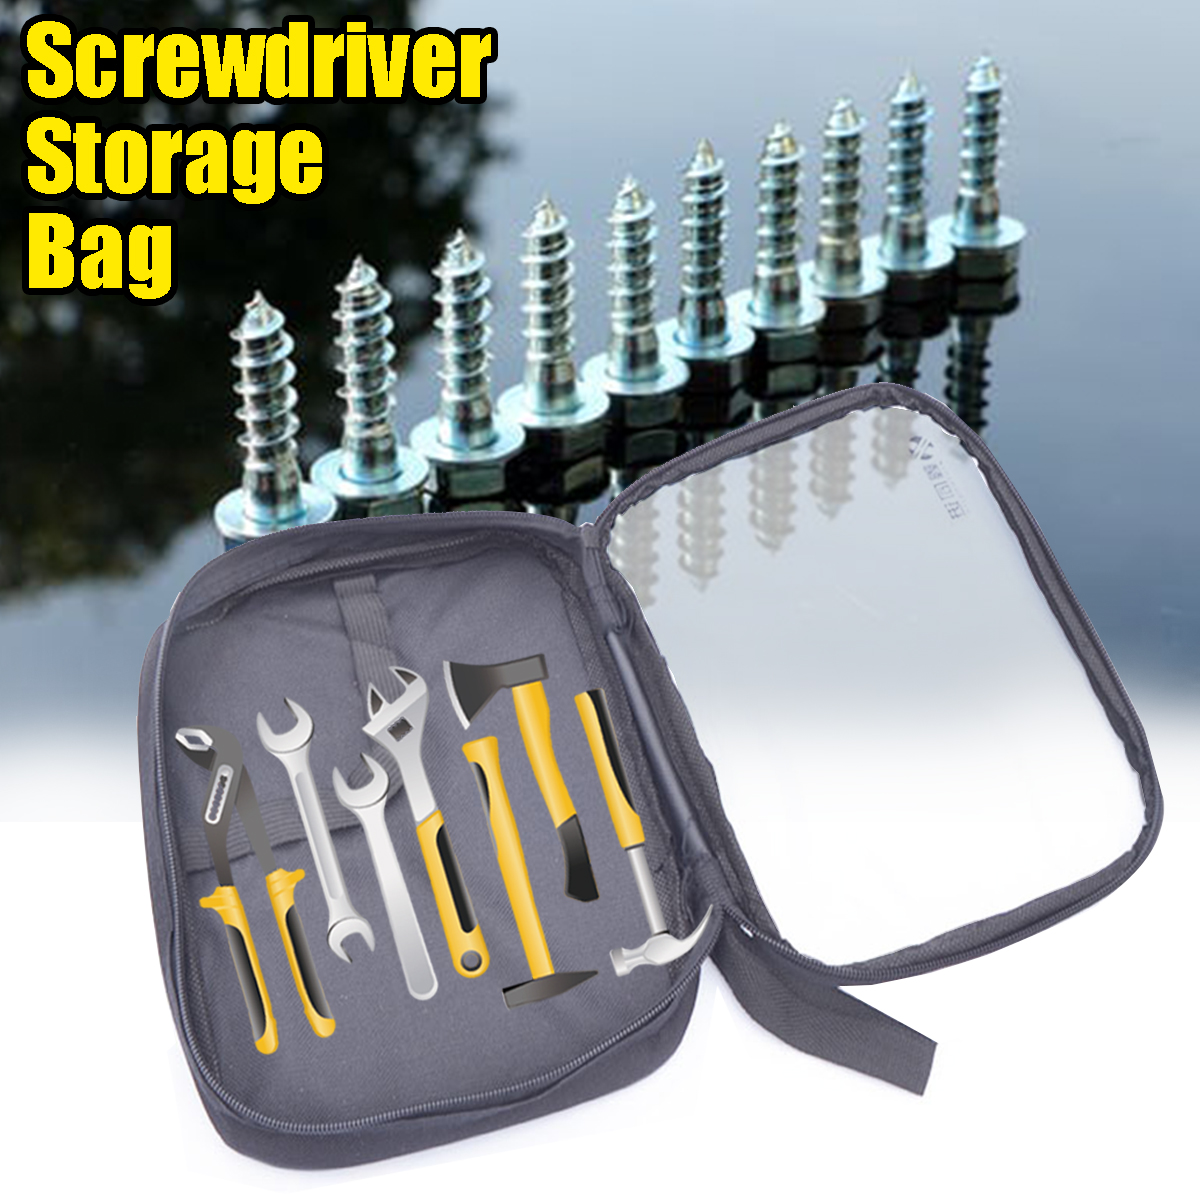 Portable-Tool-Bag-Pouch-Organize-Canvas-Storage-Bag-Small-Parts-Hand-Tool-Plumber-1557725-3